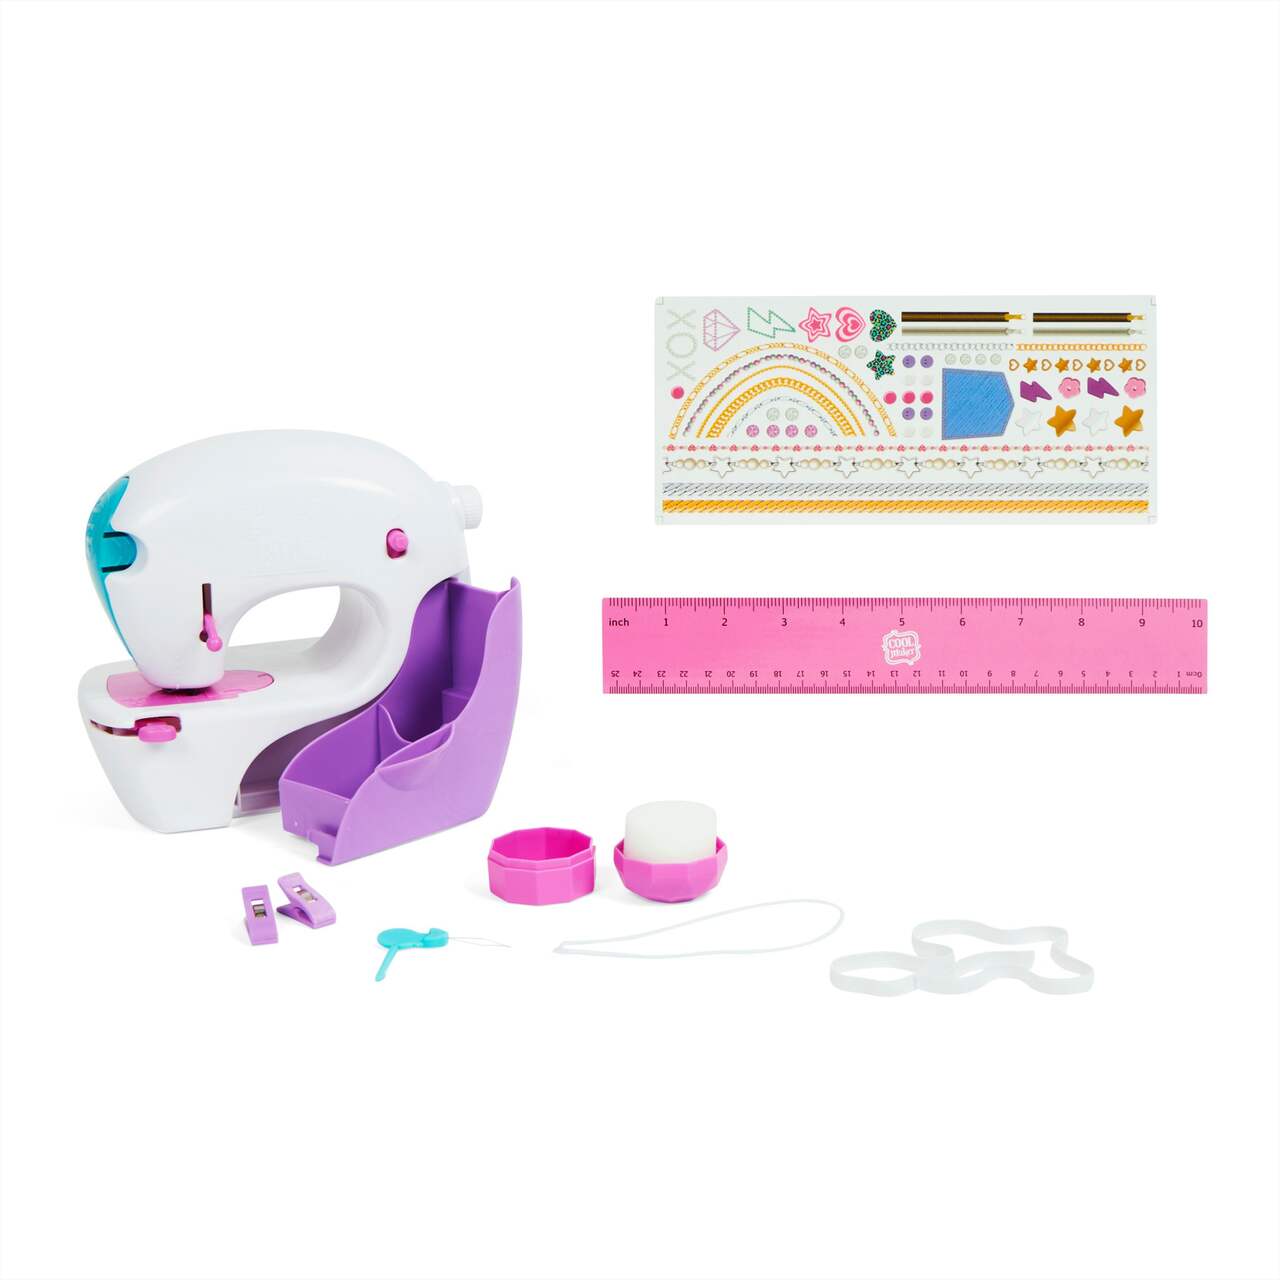 Cool Maker, Stitch 'N Style Fashion Studio Refill with 2 Pre